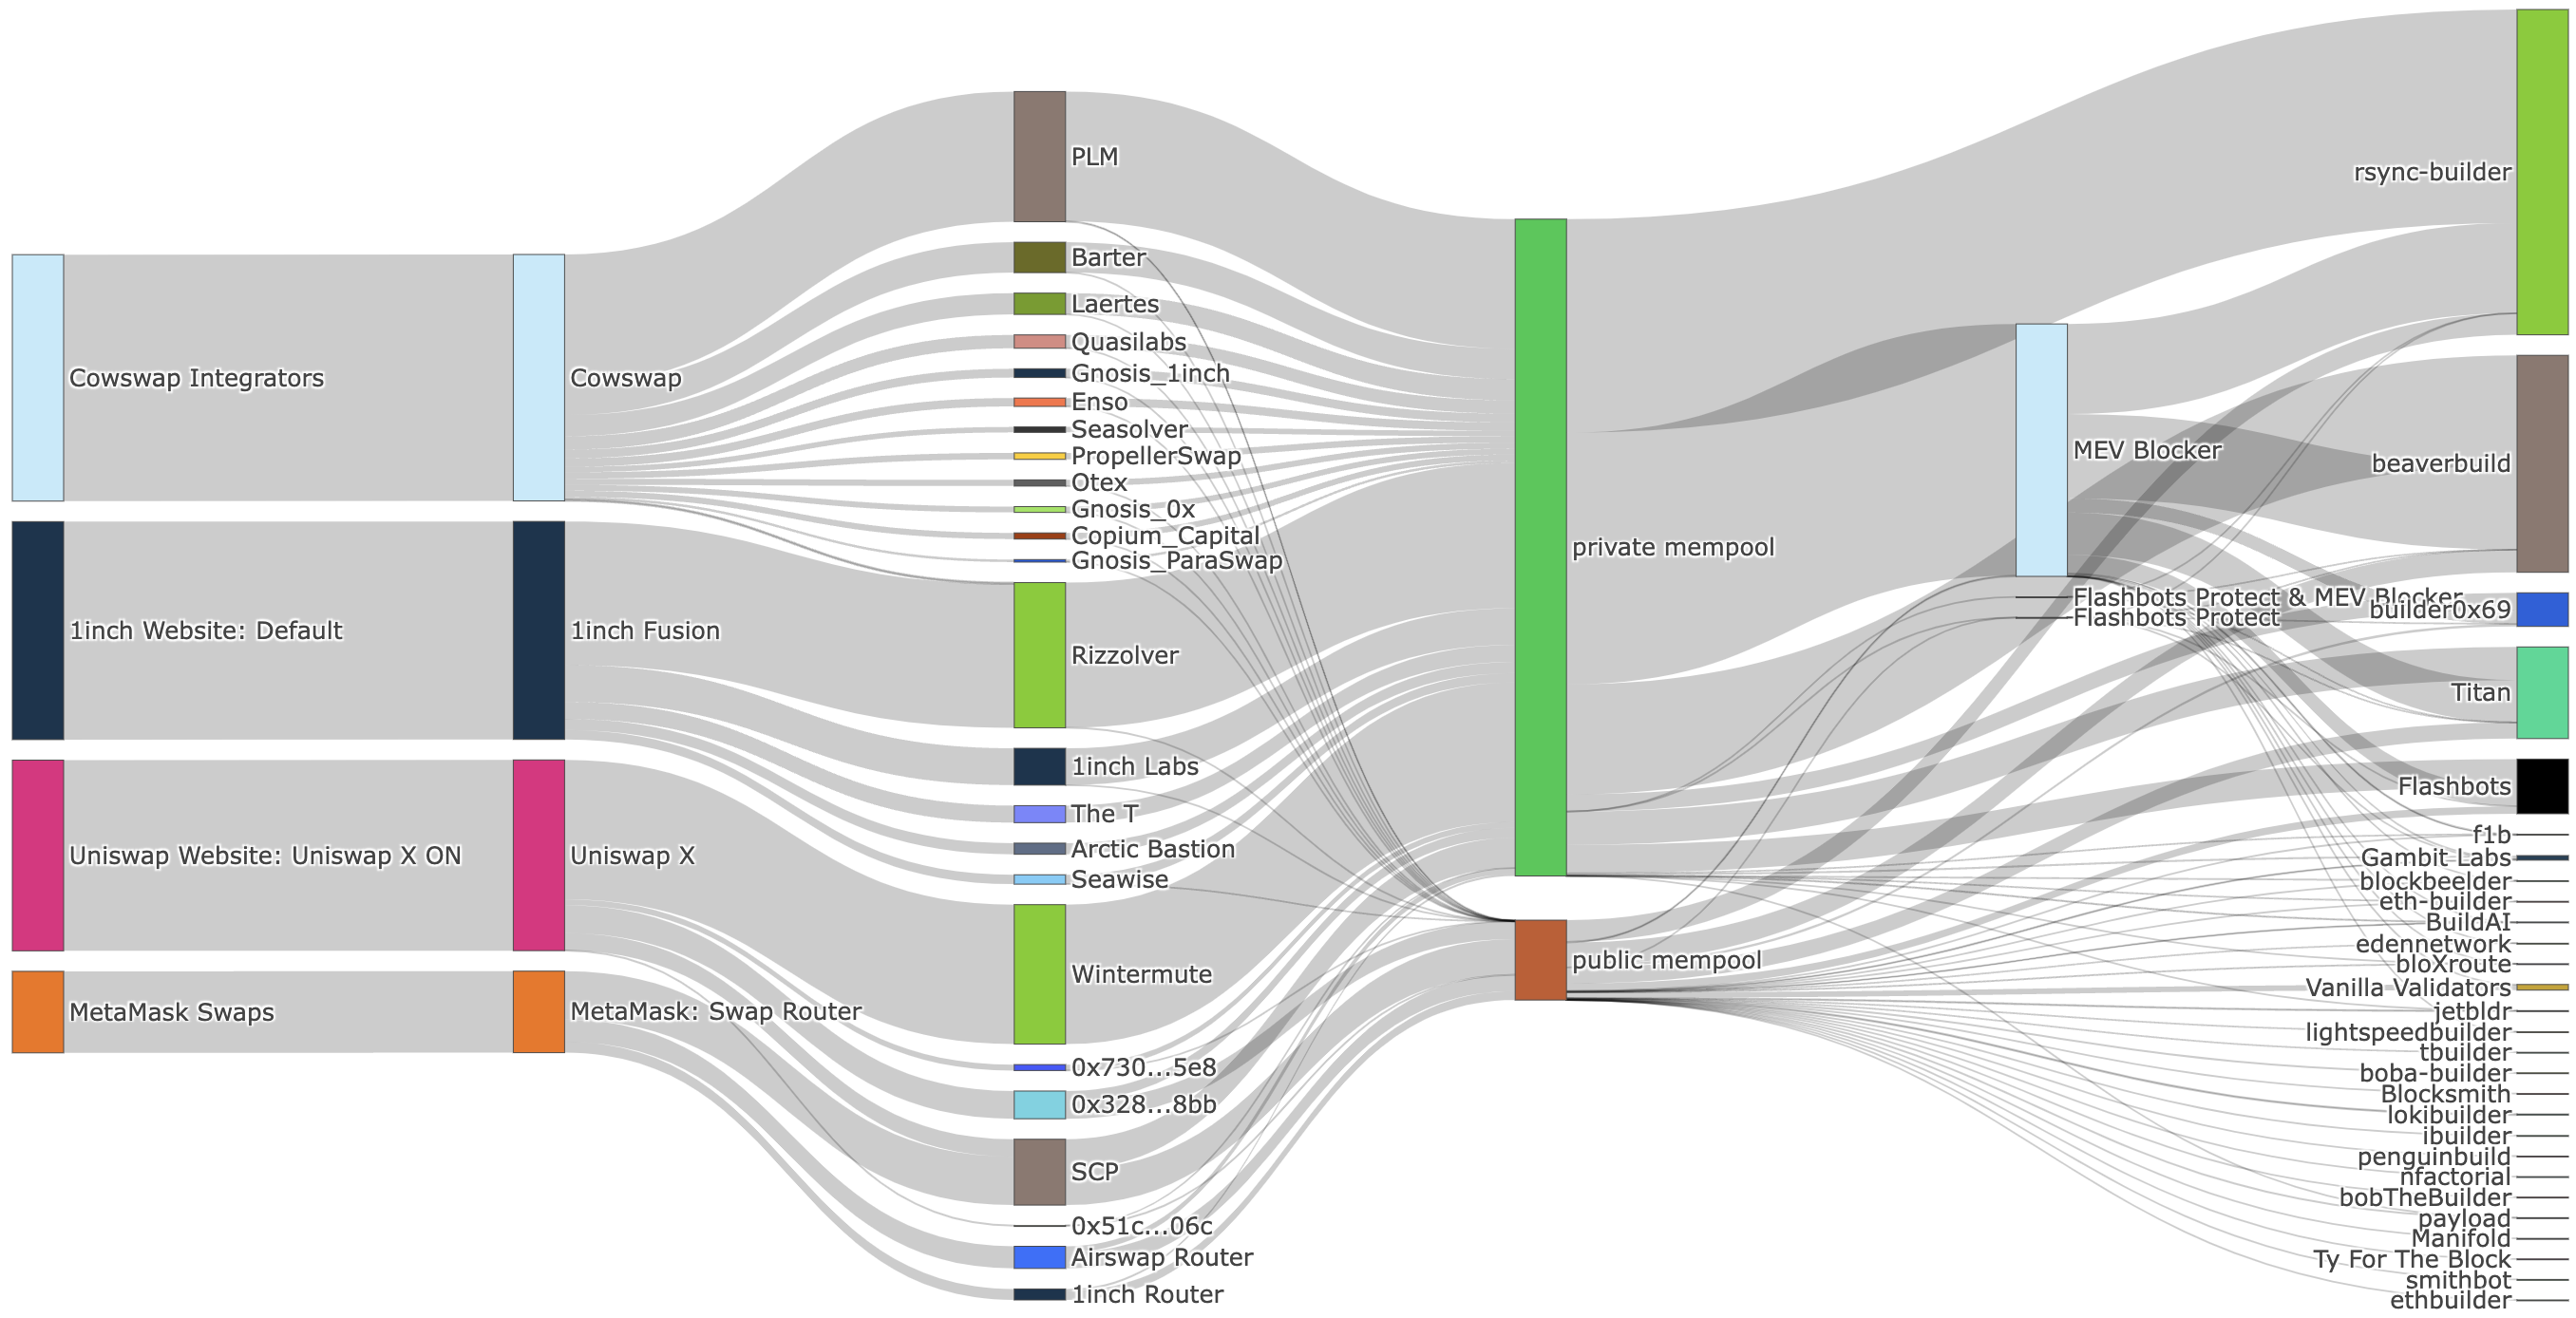 A sankey diagram [available on orderflow.art](https://orderflow.art/?isOrderflow=true&amp;metaAggregator=Uniswap+X&amp;metaAggregator=Cowswap&amp;metaAggregator=1inch+Fusion&amp;metaAggregator=MetaMask%3A+Swap+Router&amp;solver=1inch+Labs&amp;solver=The+T&amp;solver=Seawise&amp;solver=Arctic+Bastion&amp;solver=PropellerSwap&amp;solver=Gnosis_ParaSwap&amp;solver=Laertes&amp;solver=Barter&amp;solver=Quasilabs&amp;solver=Seasolver&amp;solver=Otex&amp;solver=Gnosis_1inch&amp;solver=Copium_Capital&amp;solver=Enso&amp;solver=Gnosis_0x&amp;solver=Rizzolver&amp;solver=PLM&amp;solver=0x51c...06c&amp;solver=0x730...5e8&amp;solver=SCP&amp;solver=Wintermute&amp;solver=0x328...8bb&amp;solver=Airswap+Router&amp;solver=1inch+Router&amp;timeframe=All&amp;pairs=ETH-USDC&amp;pairs=USDC-WETH&amp;pairs=ETH-USDT&amp;pairs=USDT-WETH&amp;pairs=DAI-WETH&amp;pairs=DAI-ETH&amp;pairs=USDC-WBTC&amp;pairs=USDT-WBTC&amp;pairs=DAI-WBTC&amp;pairs=WBTC-WETH&amp;startTime=1698811200&amp;endTime=1701363599).